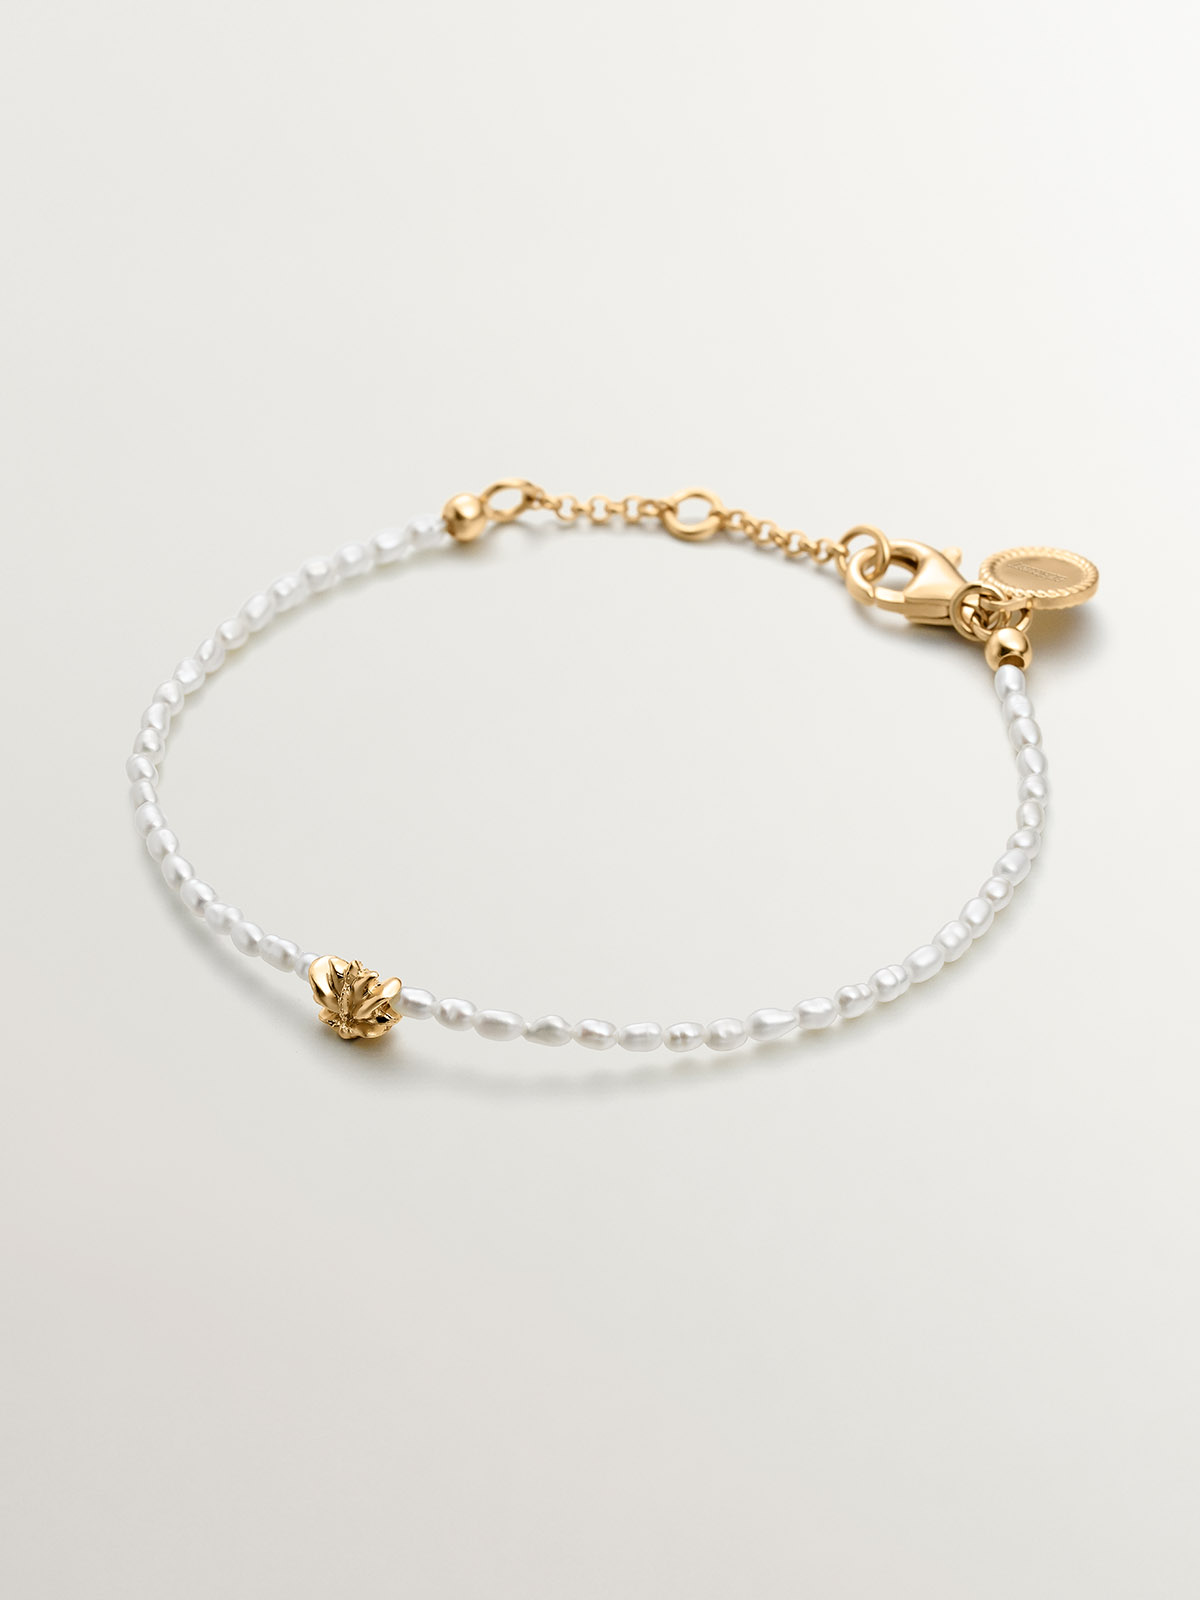 River pearl bracelet with 925 silver lotus flower coated in 18K yellow gold.